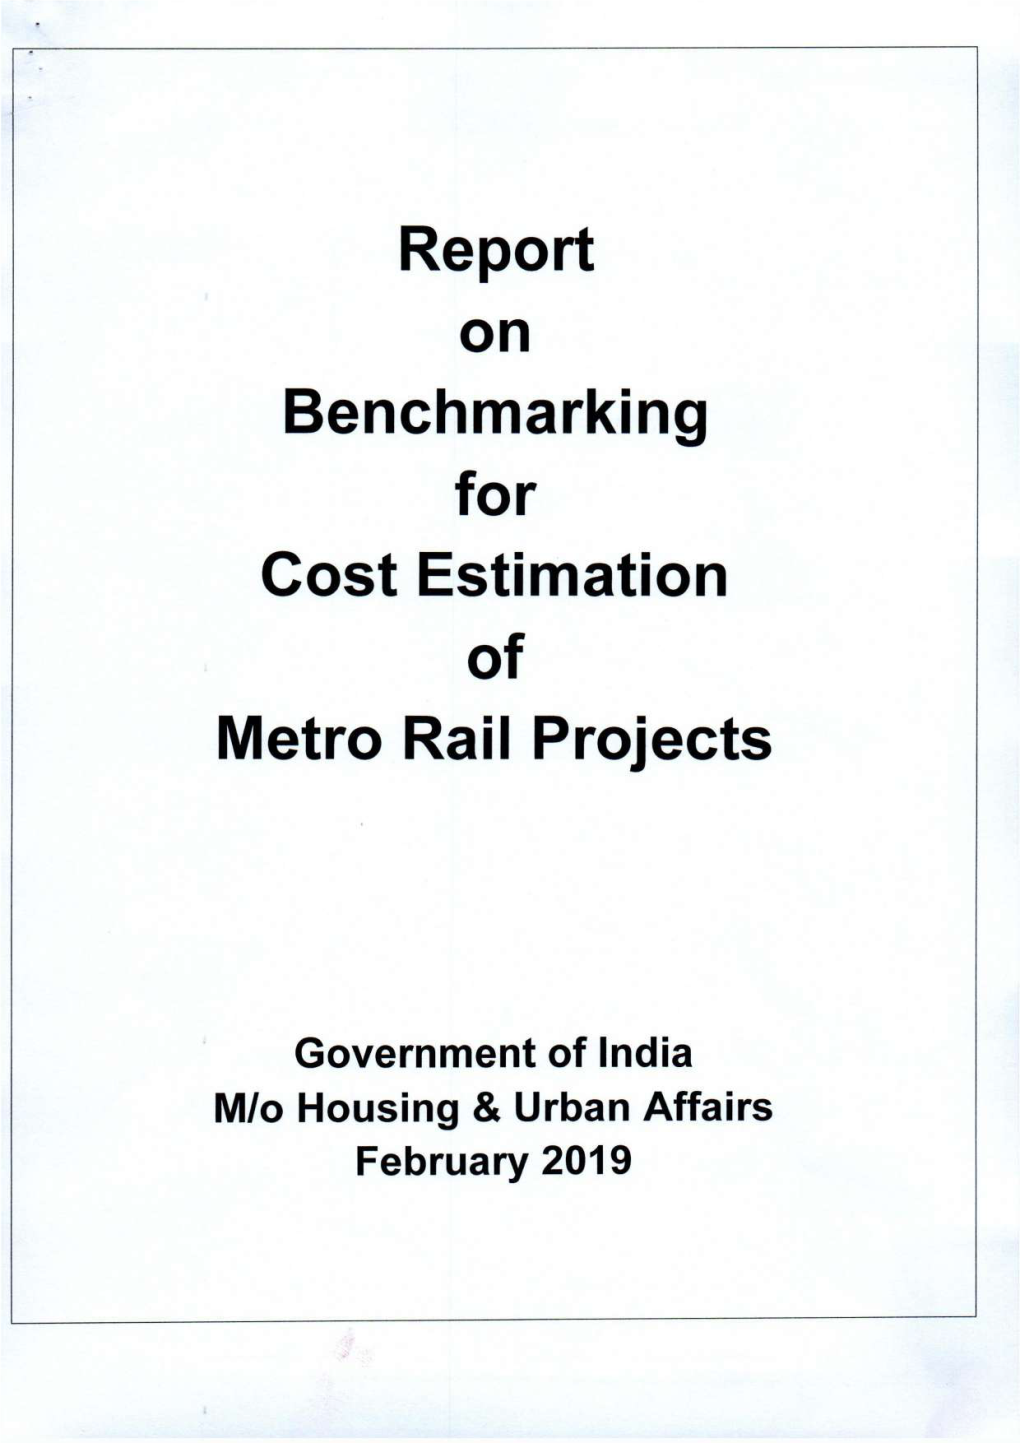 Report Benchmarking Cost Estimation of Metro Rail Projects